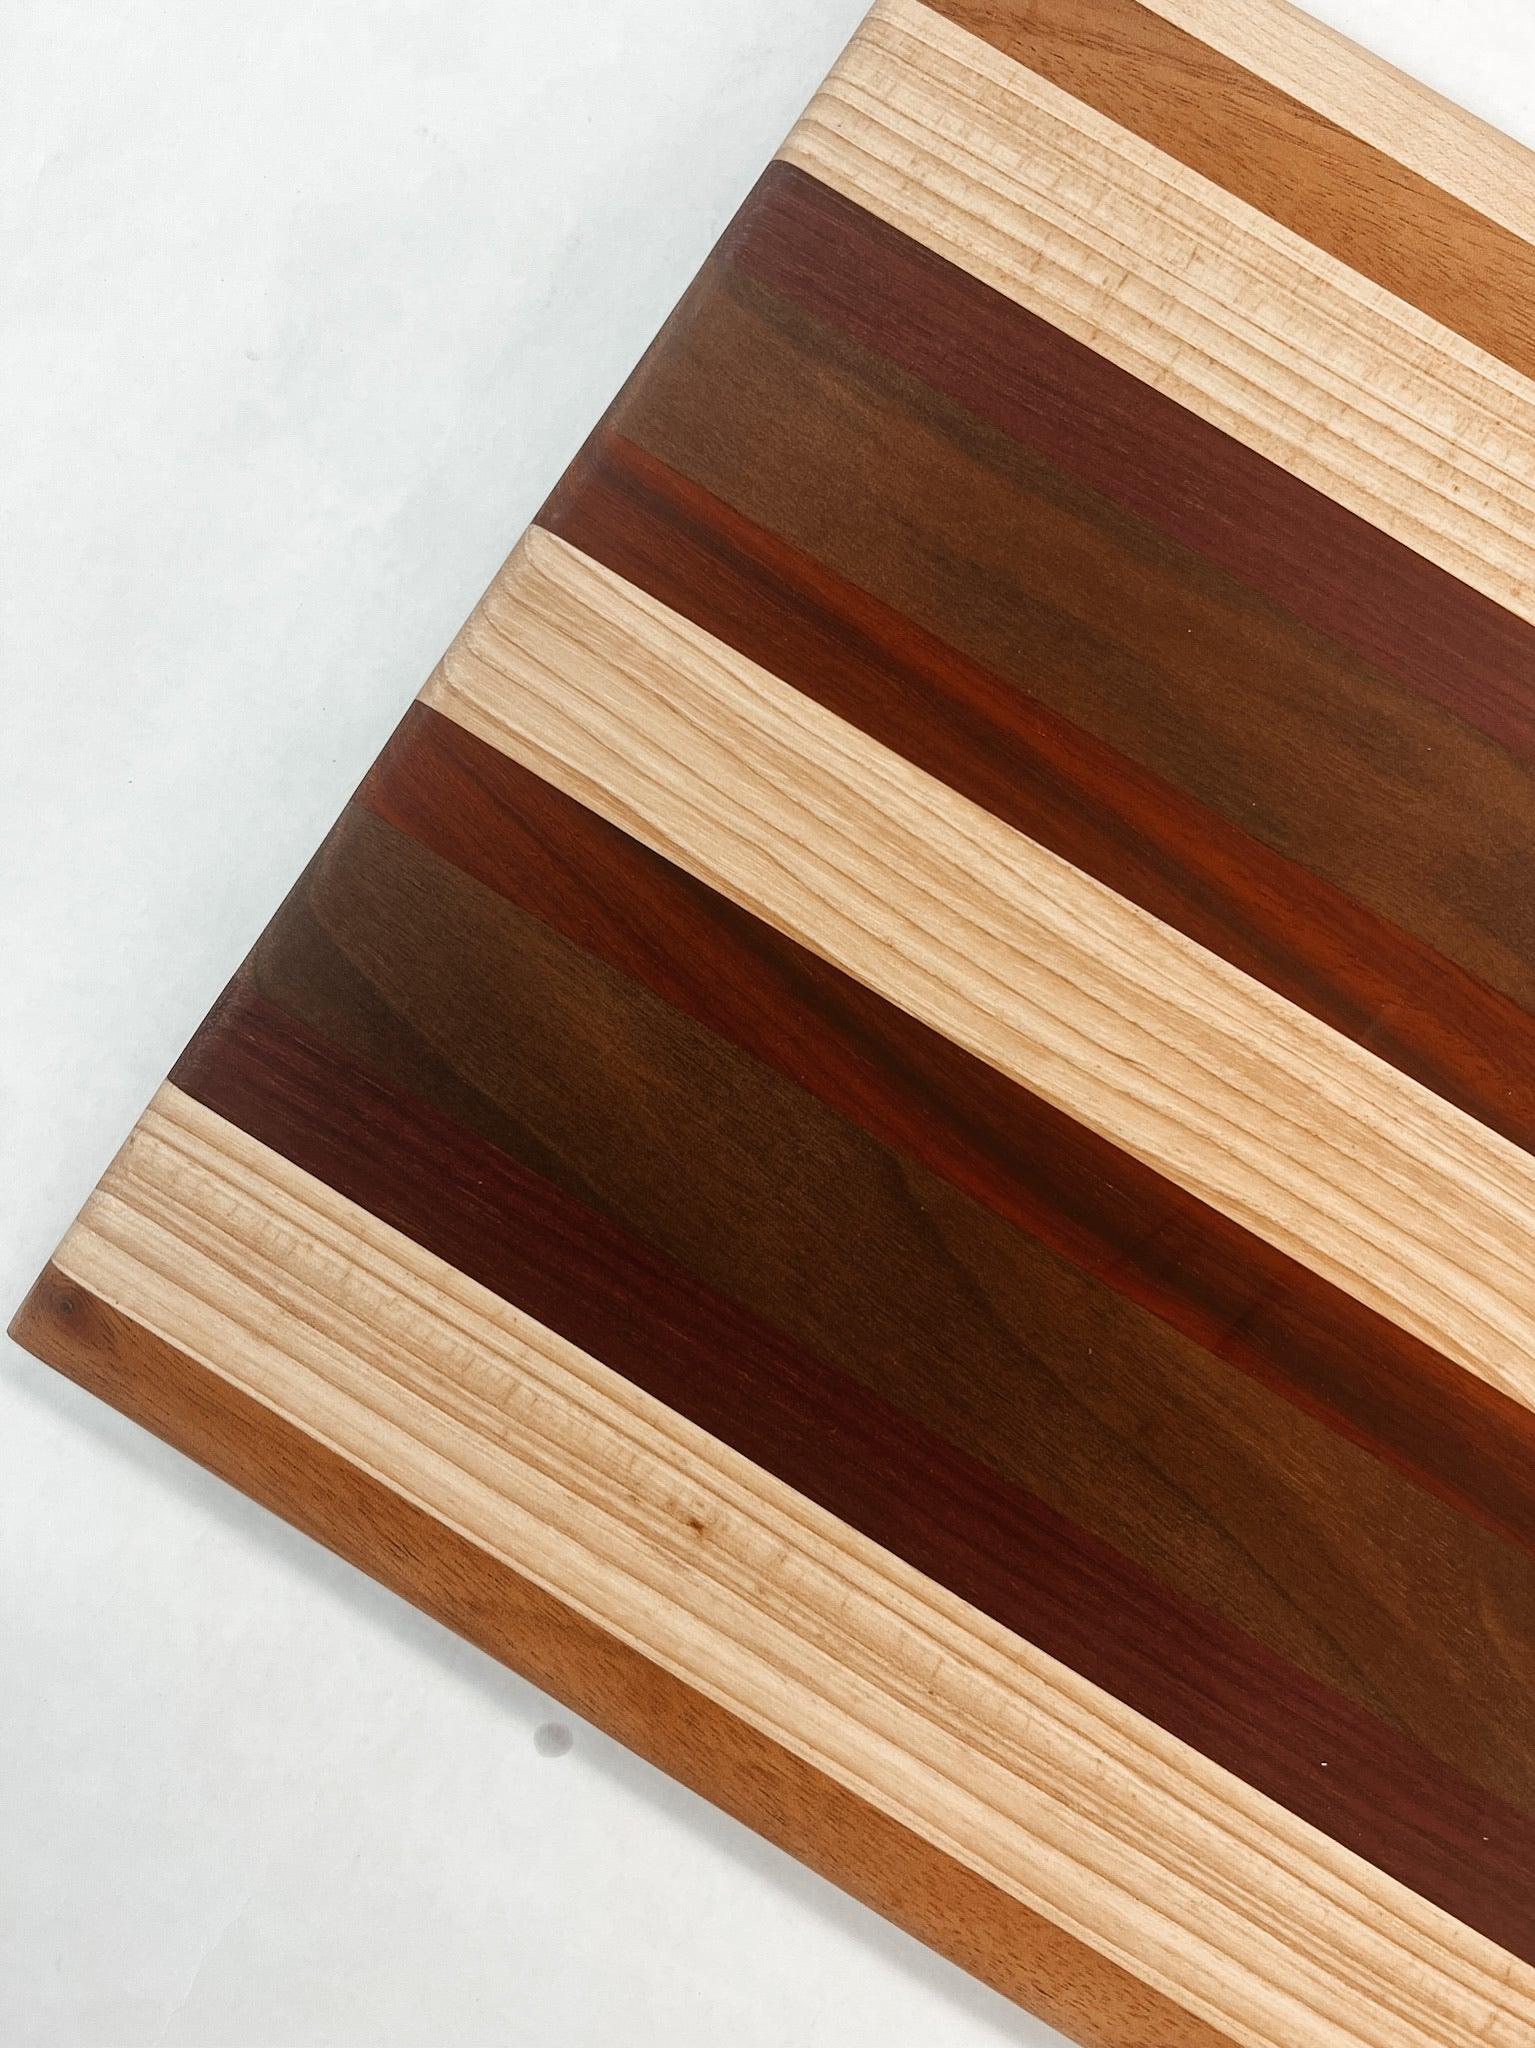 The Medley Cutting Board Collection